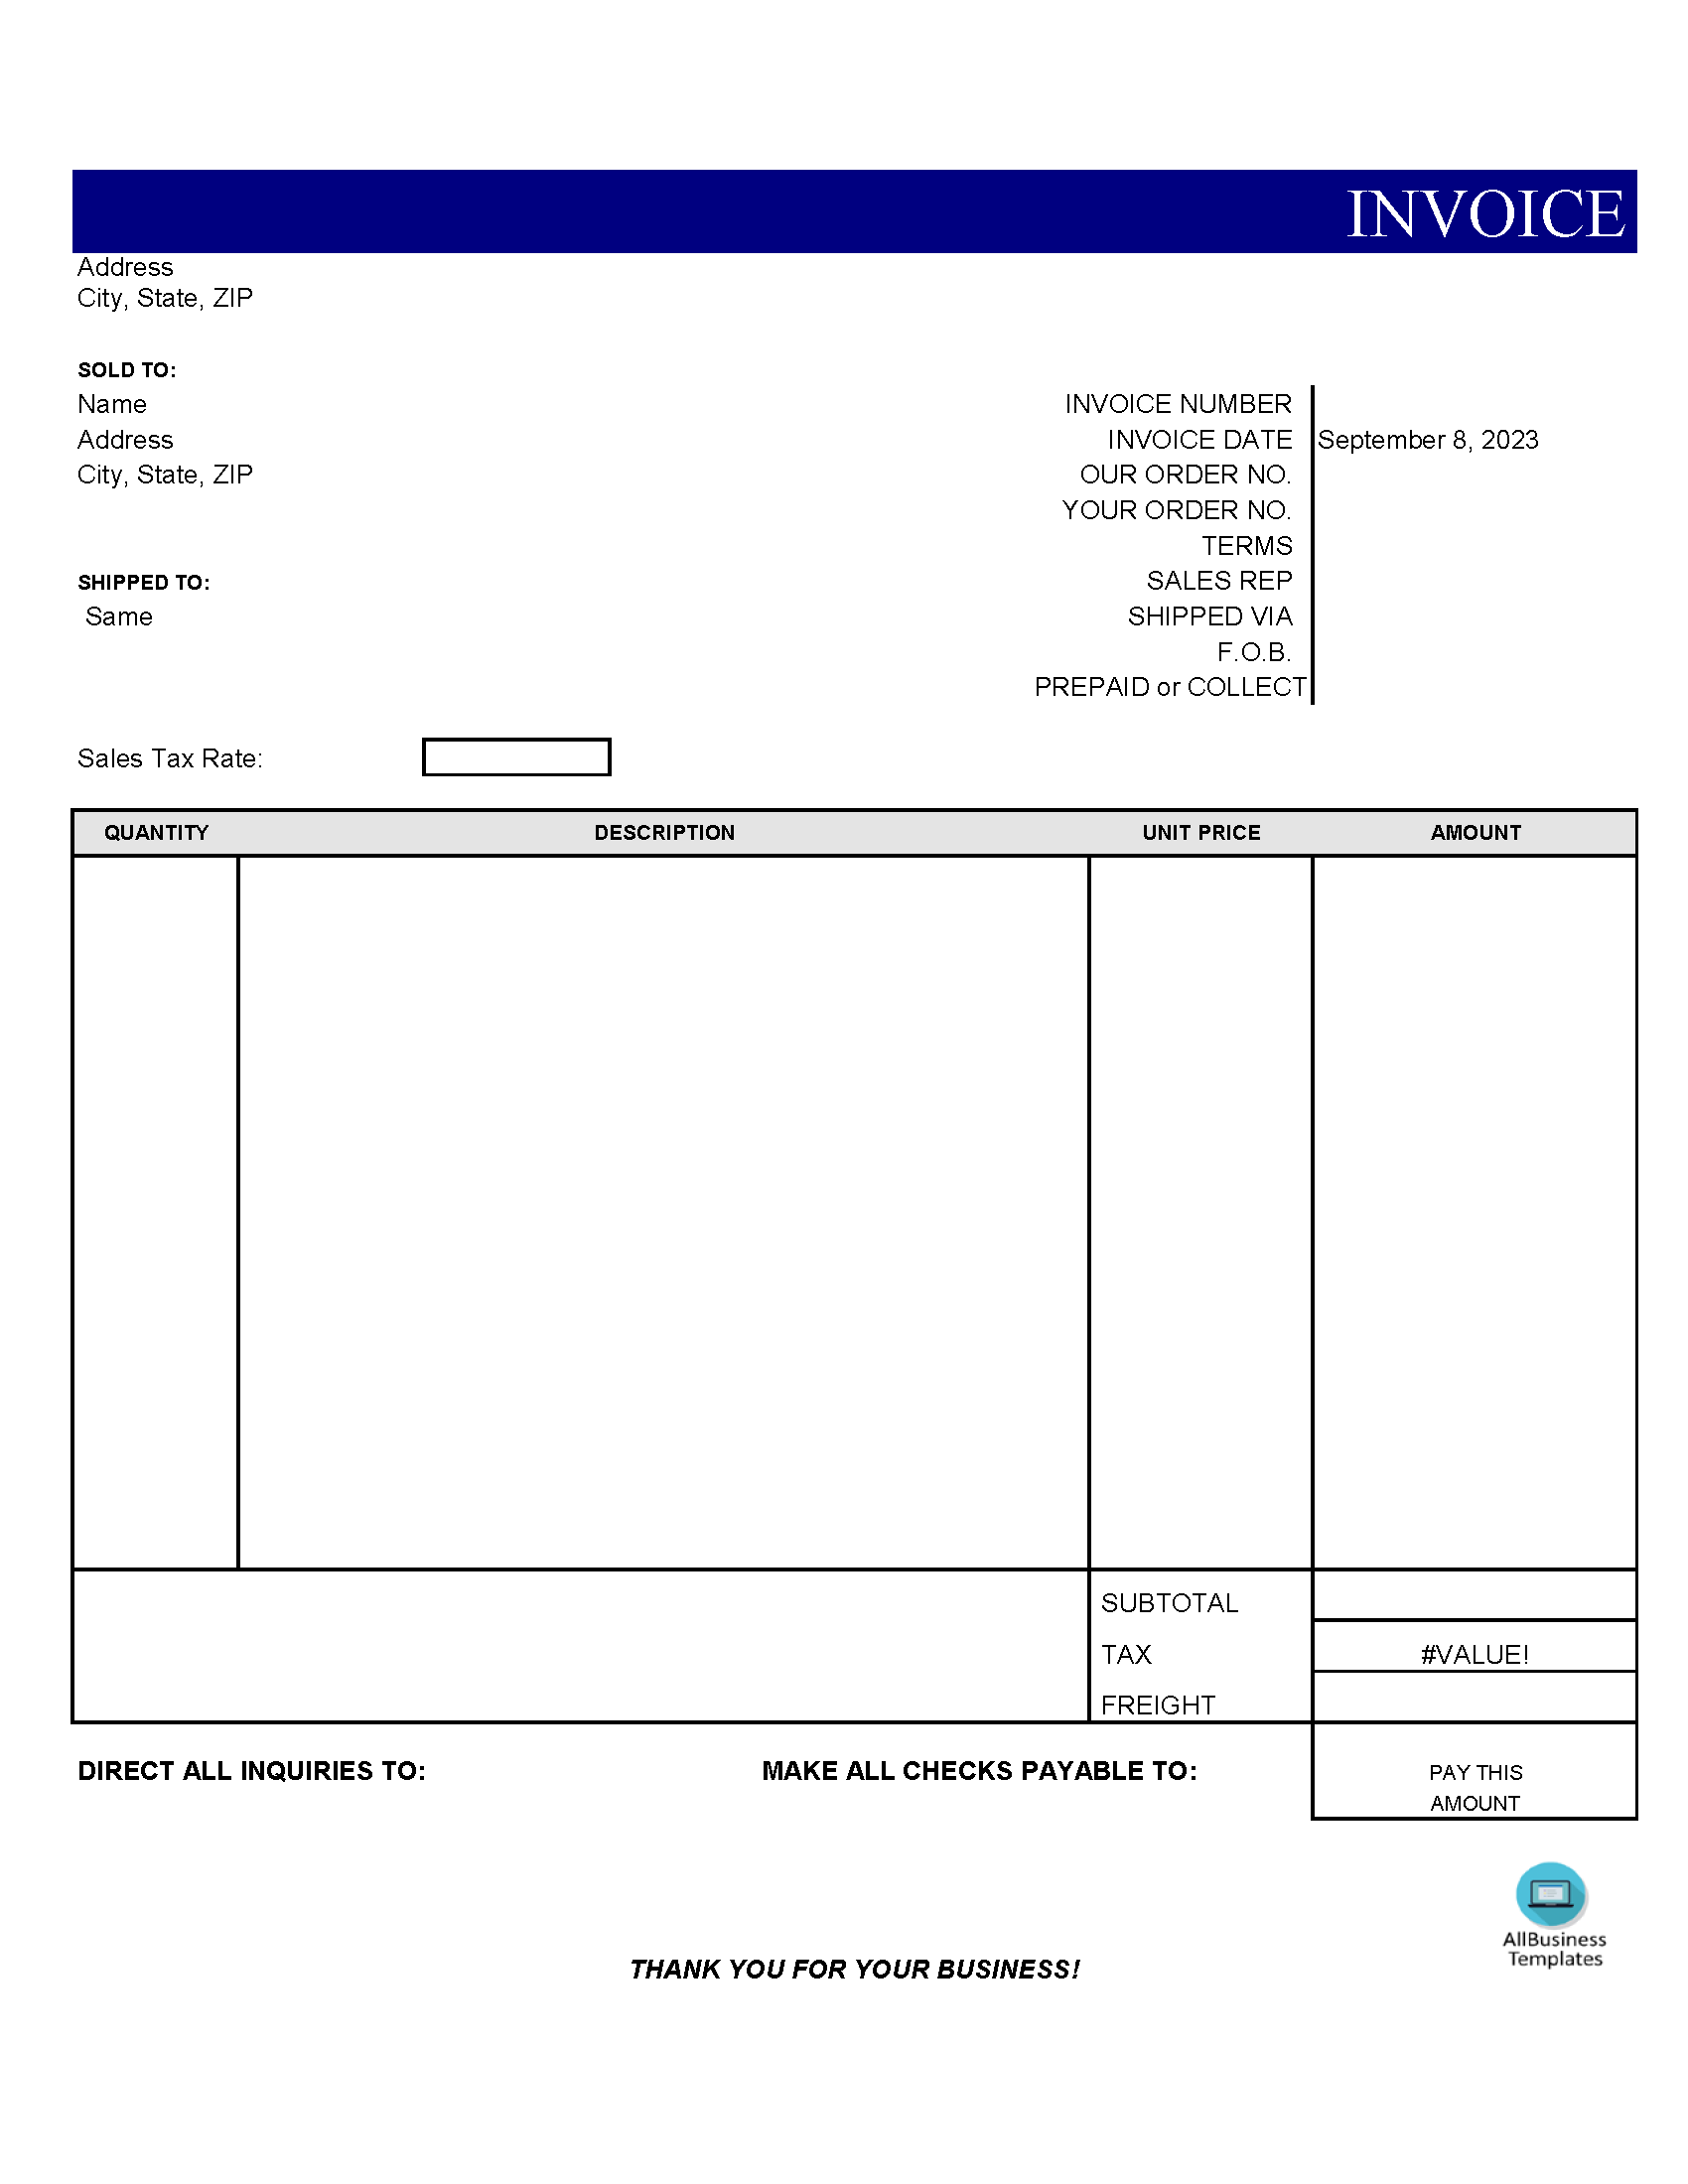 blank invoice excel template